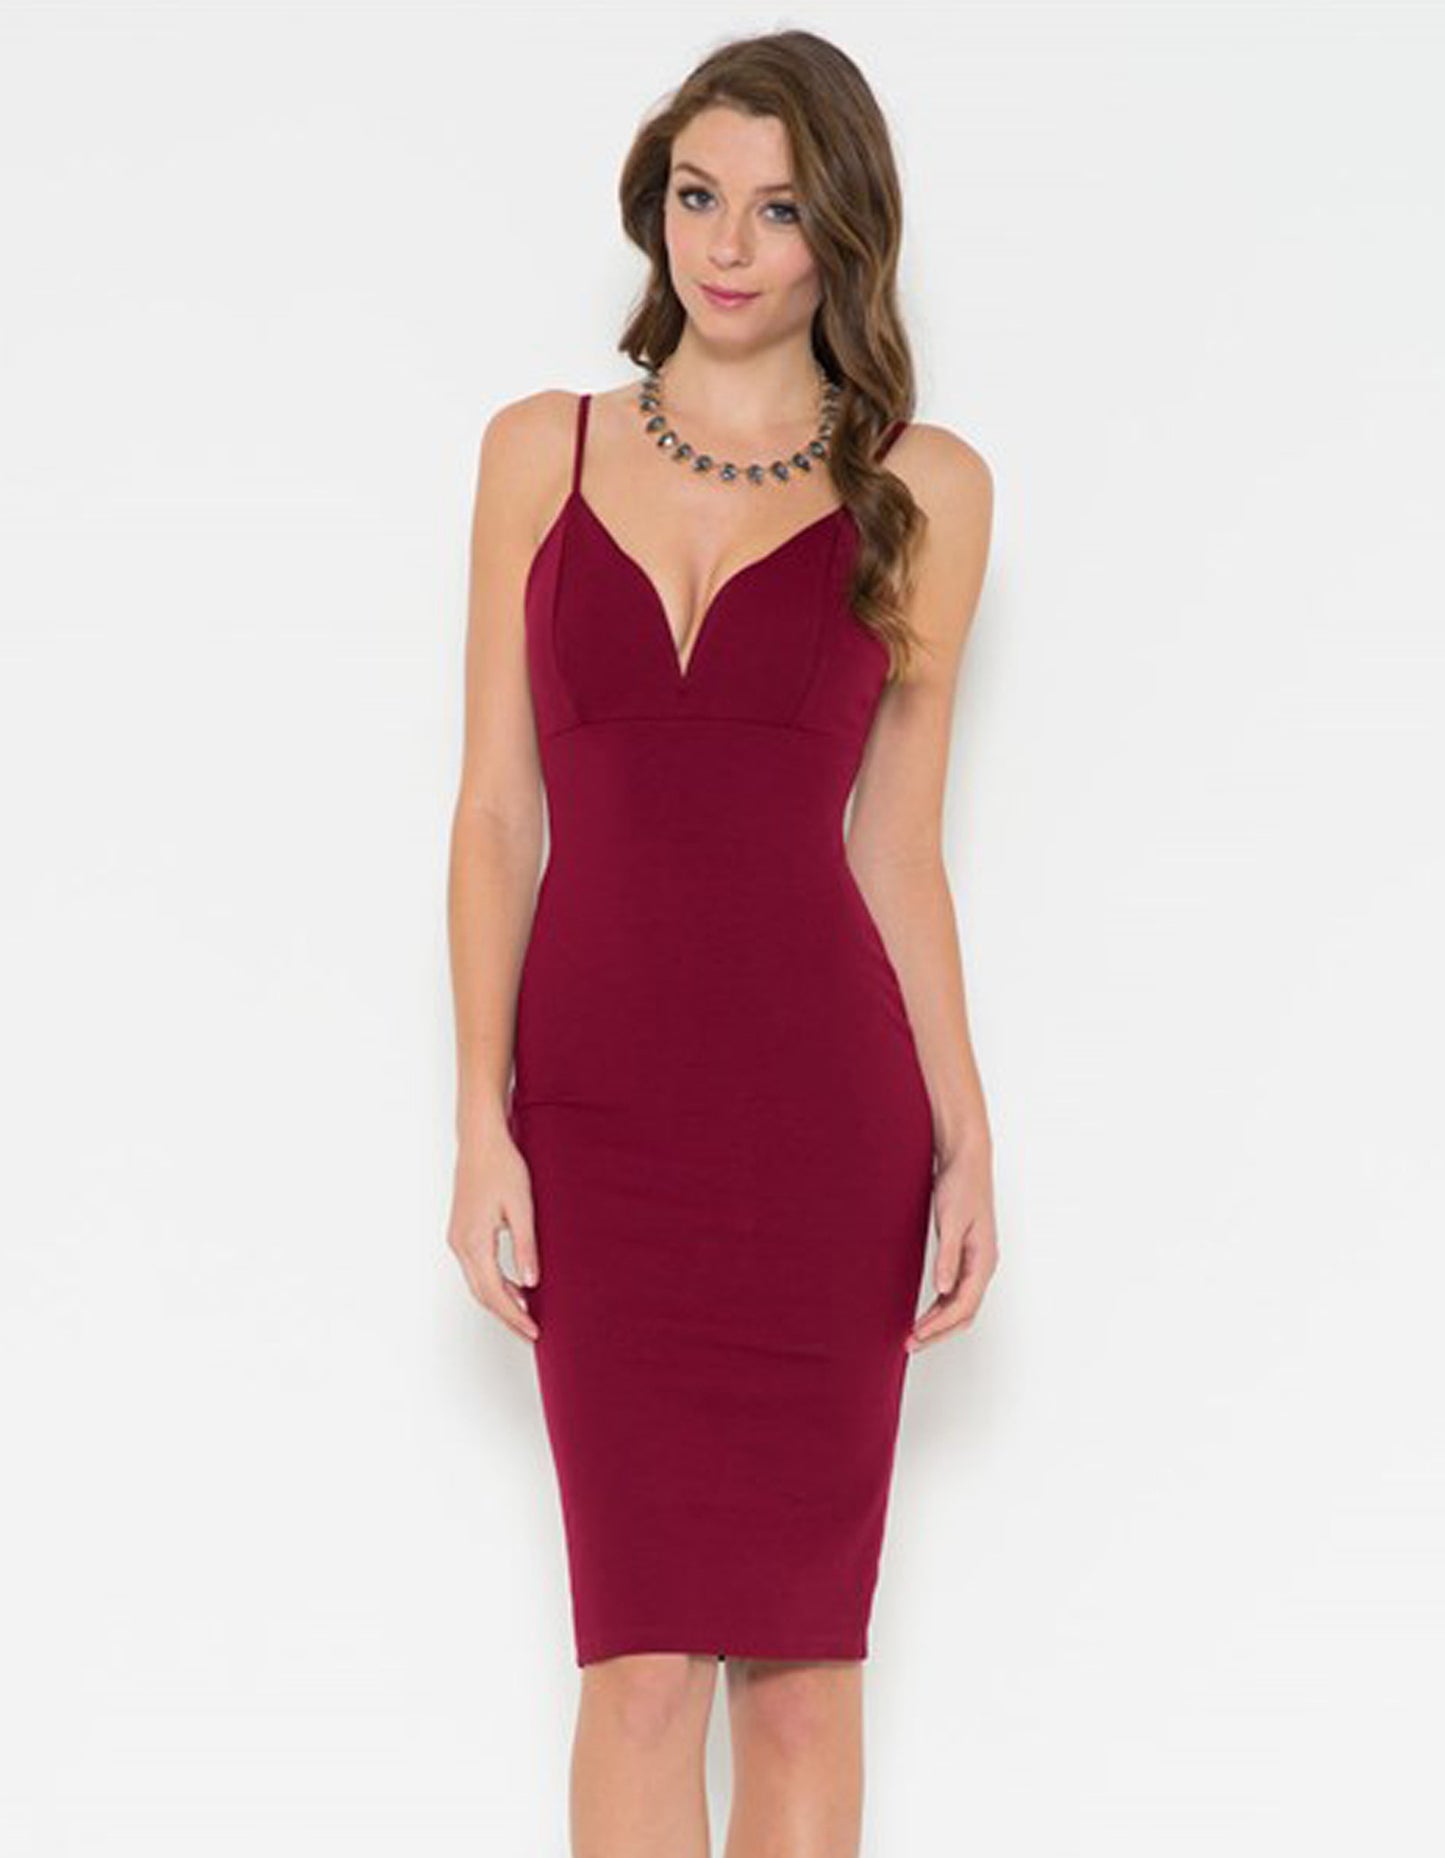 Ponti Verona Deep Neck Fitted Red Dress